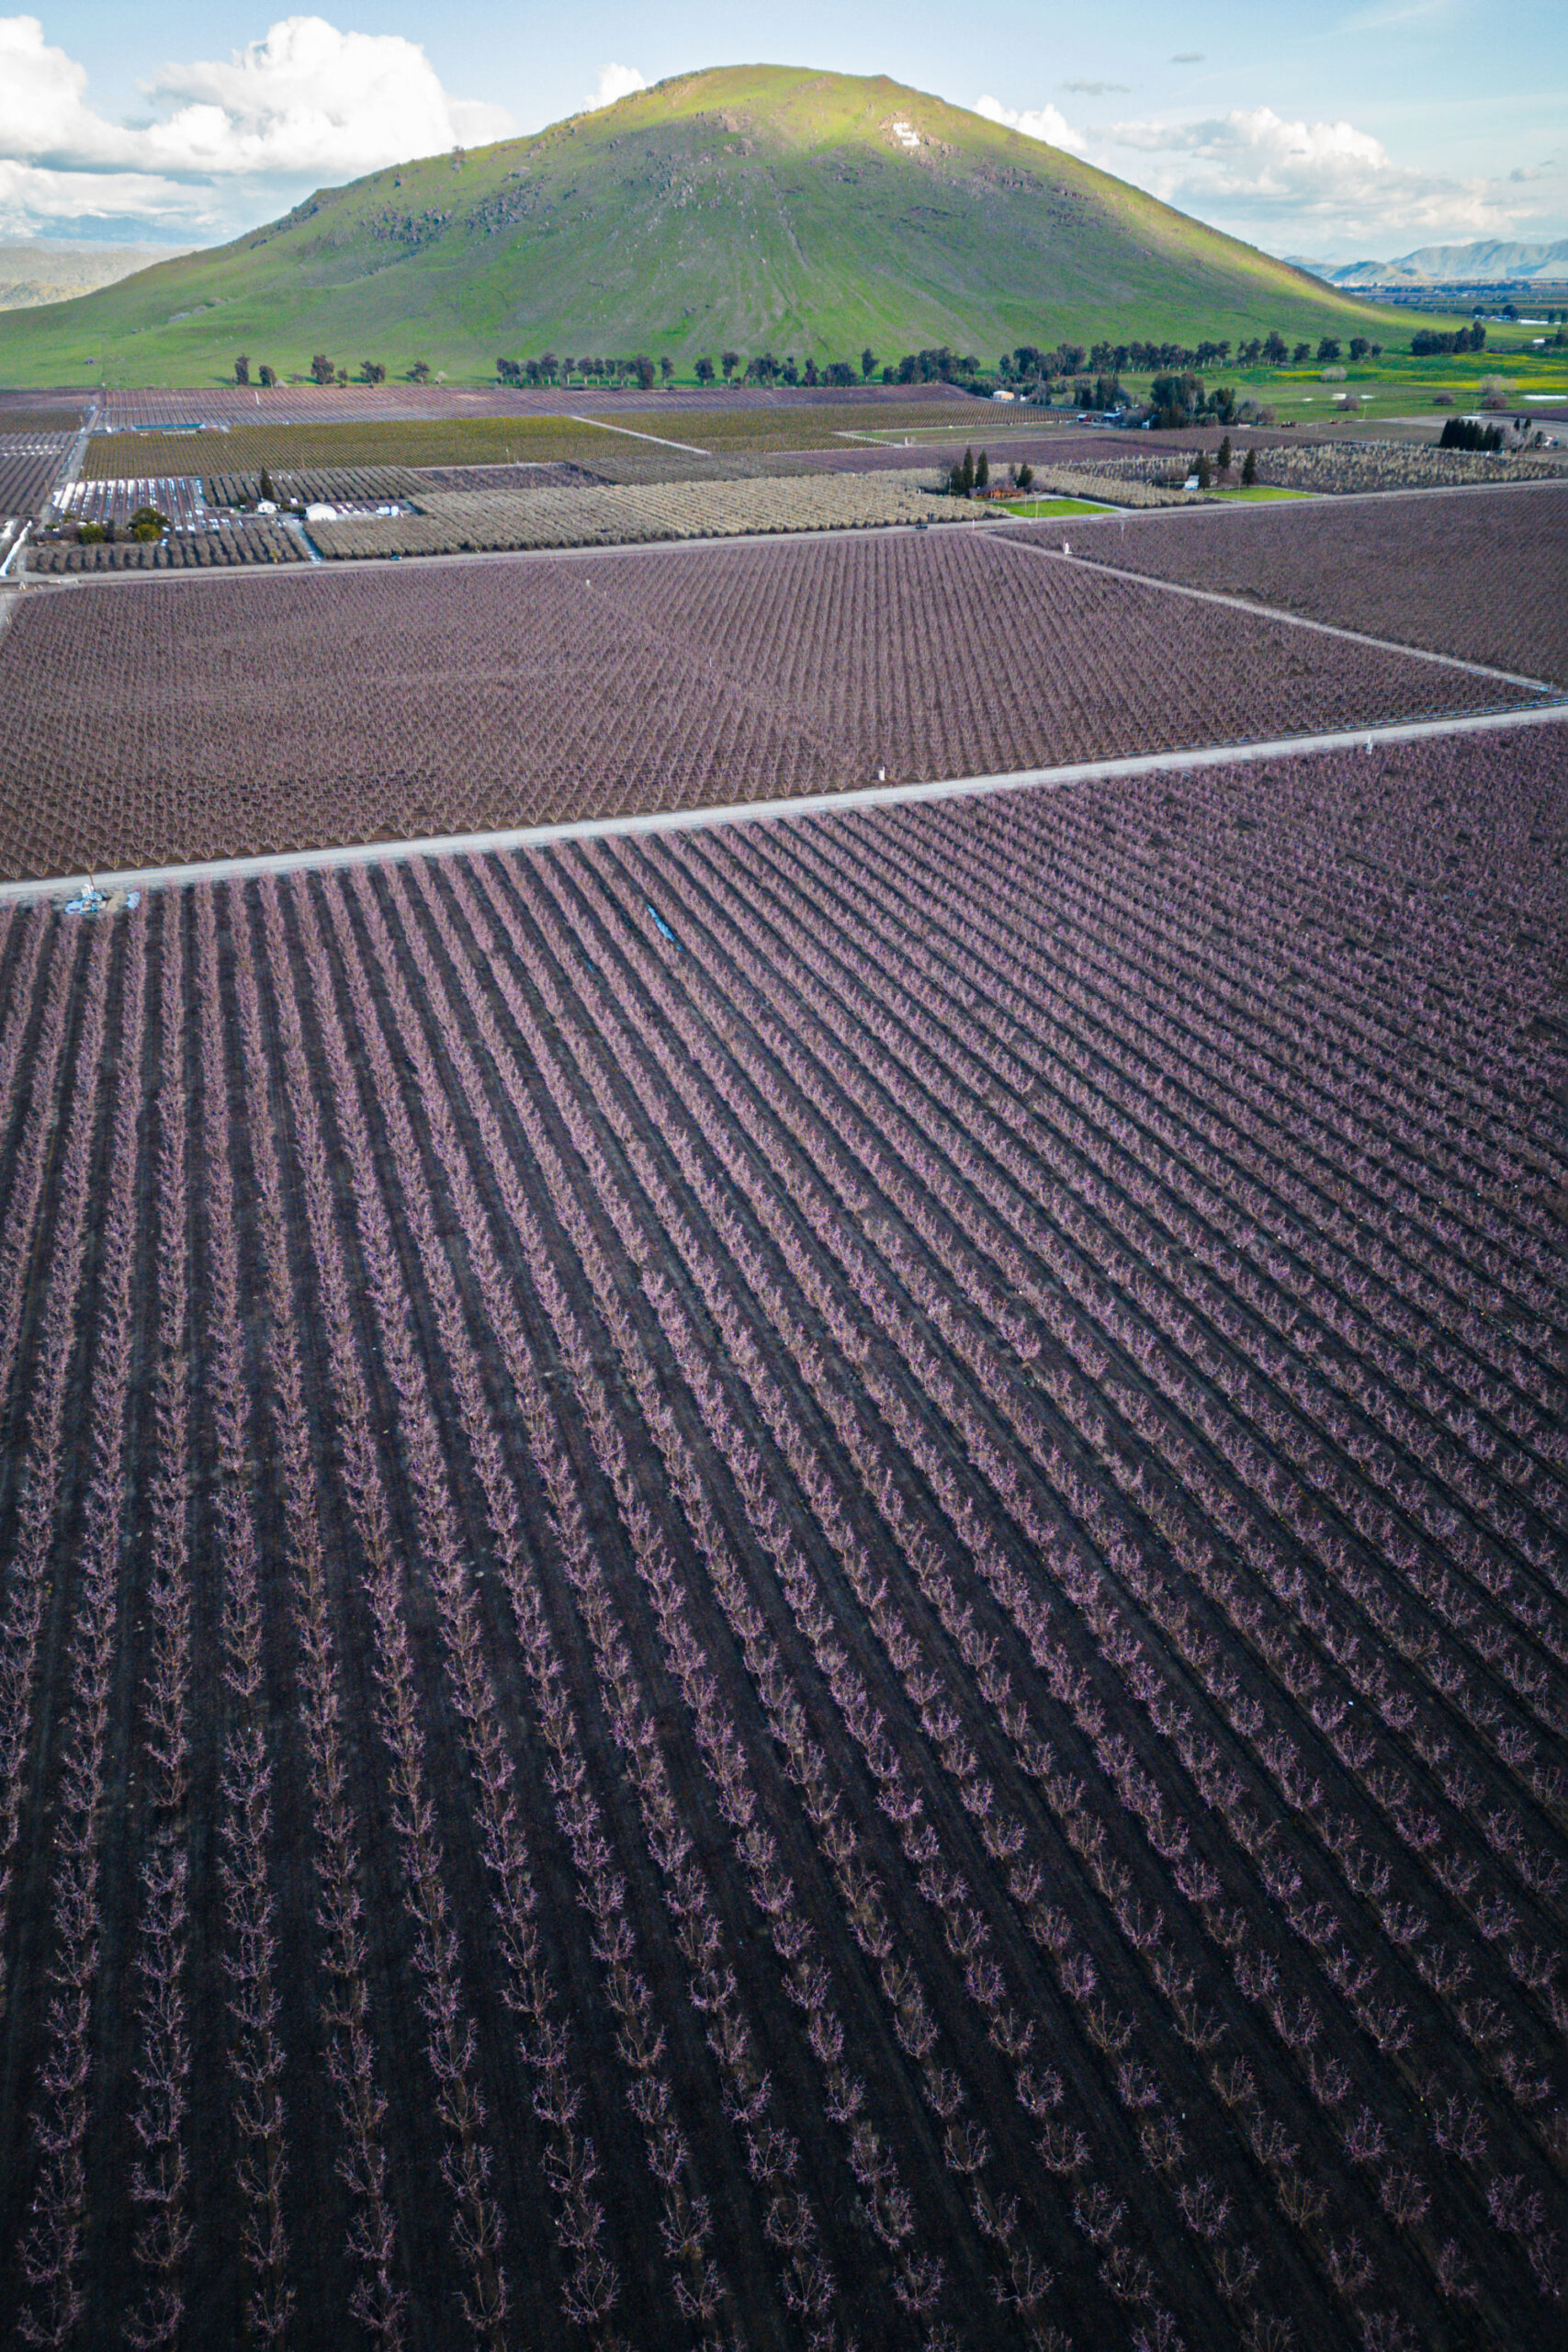 Aerial view of the Sanger hillside above a stone fruit orchard